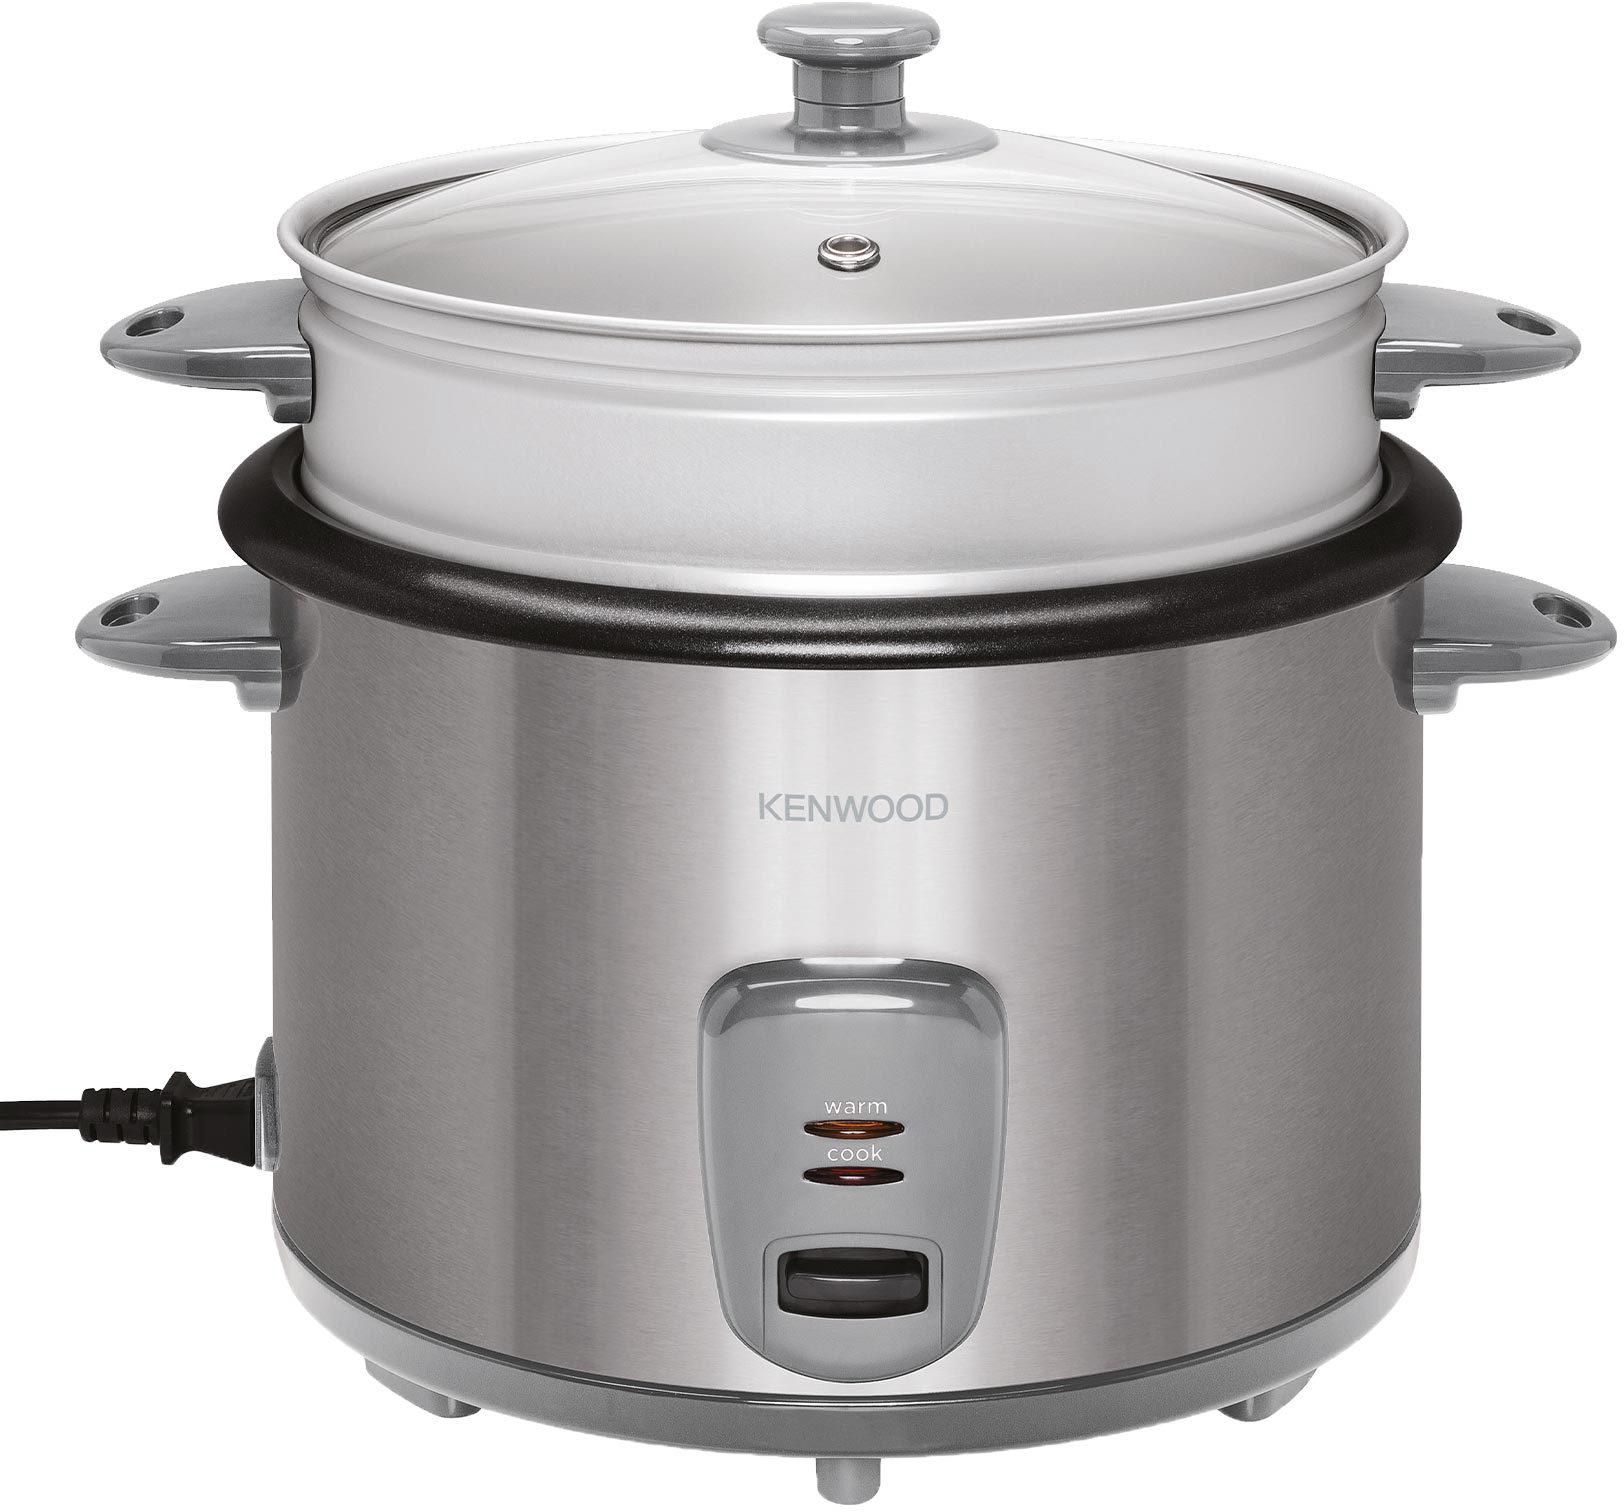 Kenwood rice cooker, 1.8L, 700W, OWRCM43.A0SS, Silver